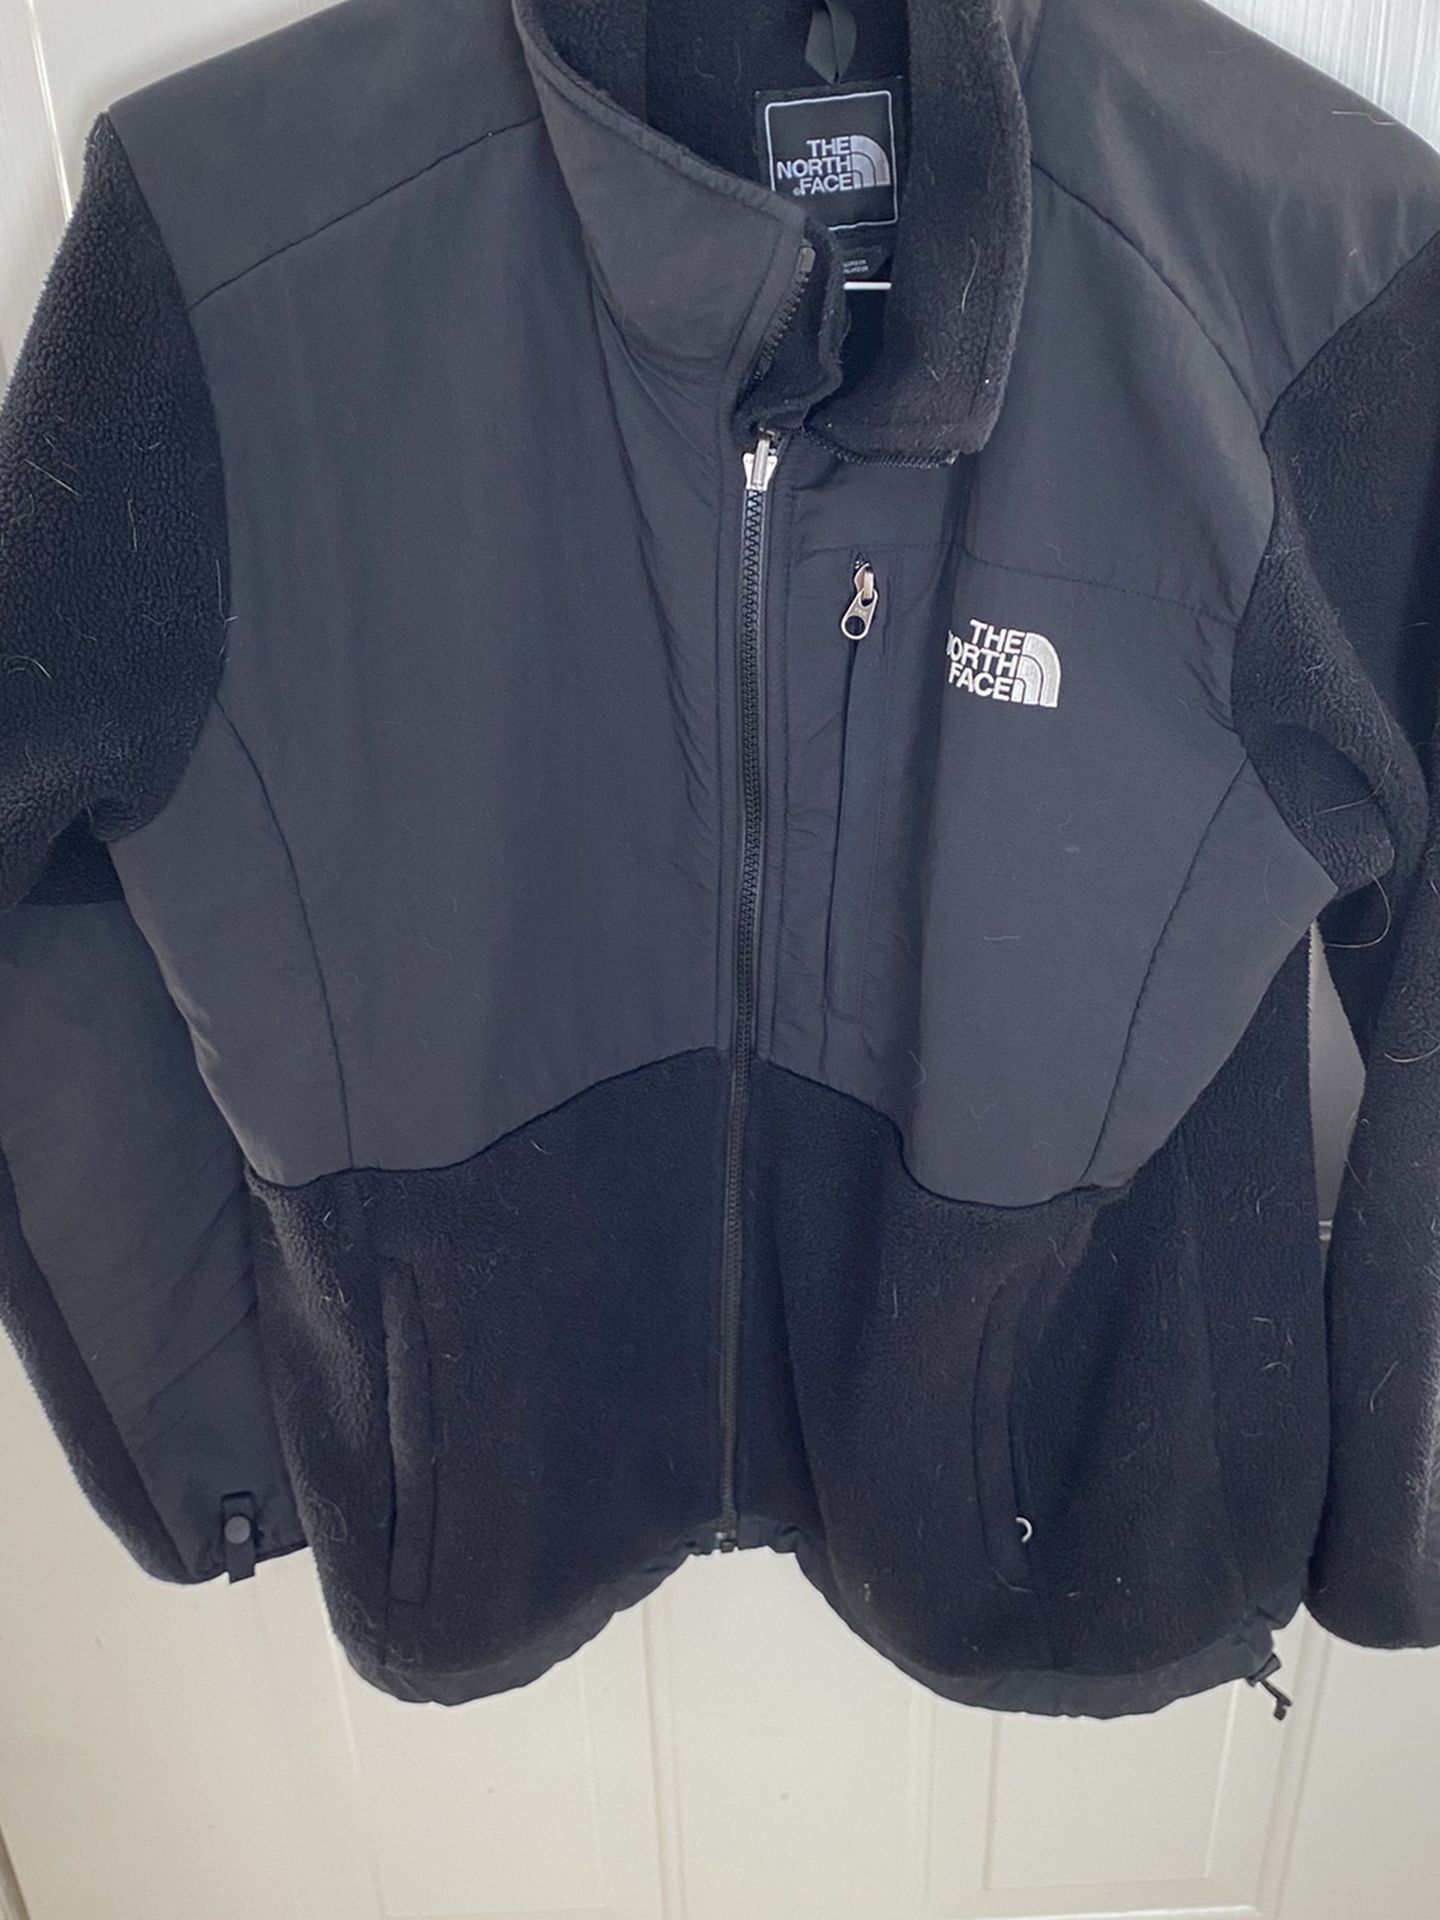 GUC Black Adult XL North Face Fleece Jacket (new selling for $200)